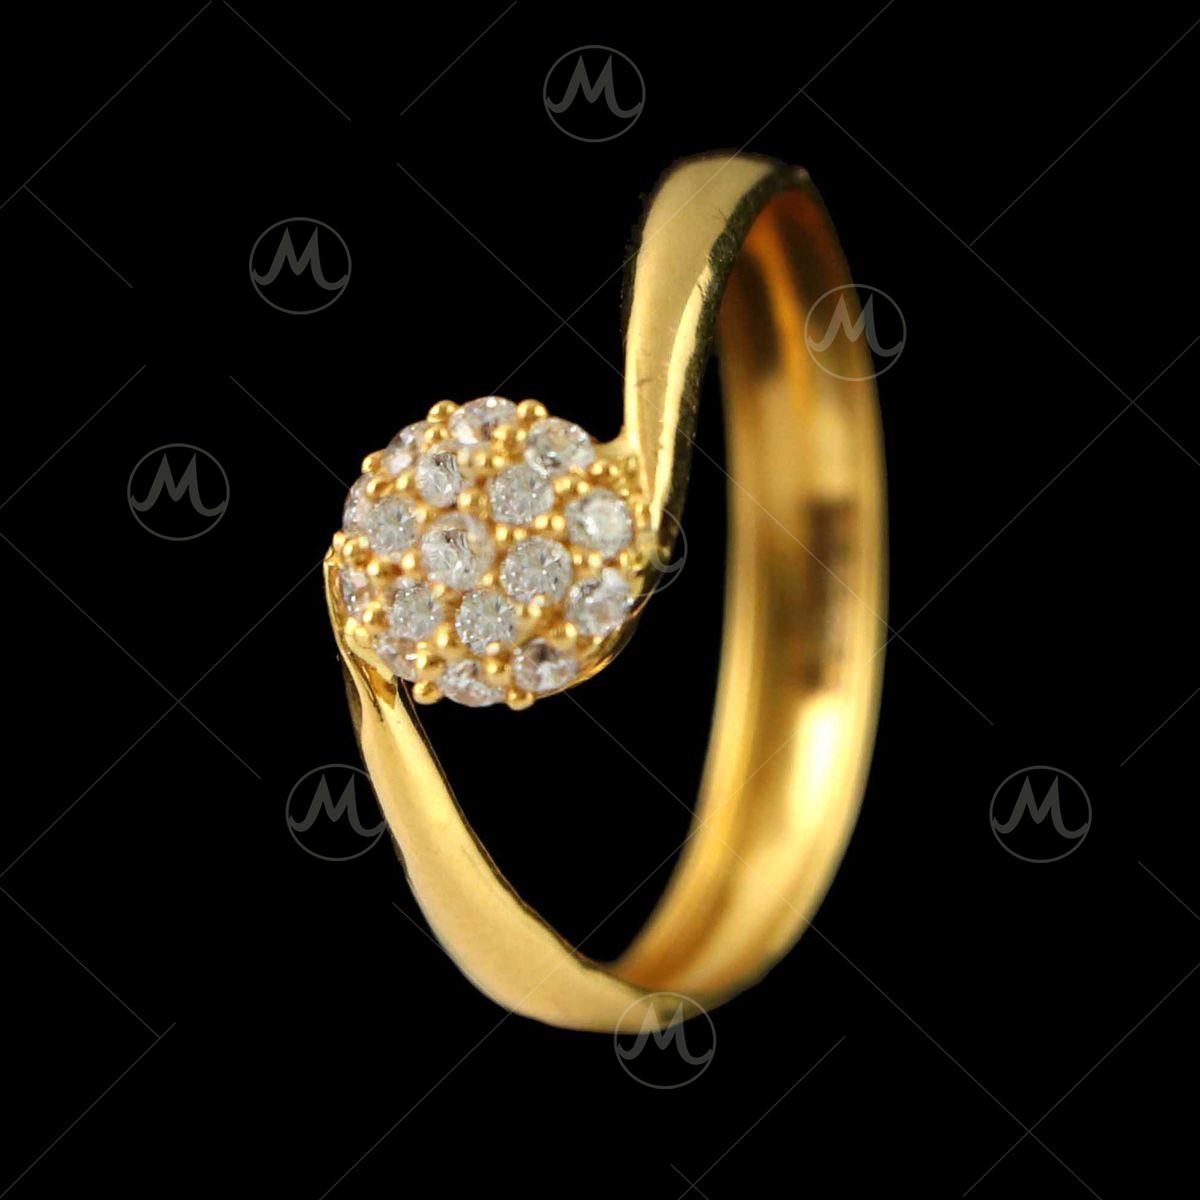 Buy quality double heart ladies fancy gold ring in Ahmedabad